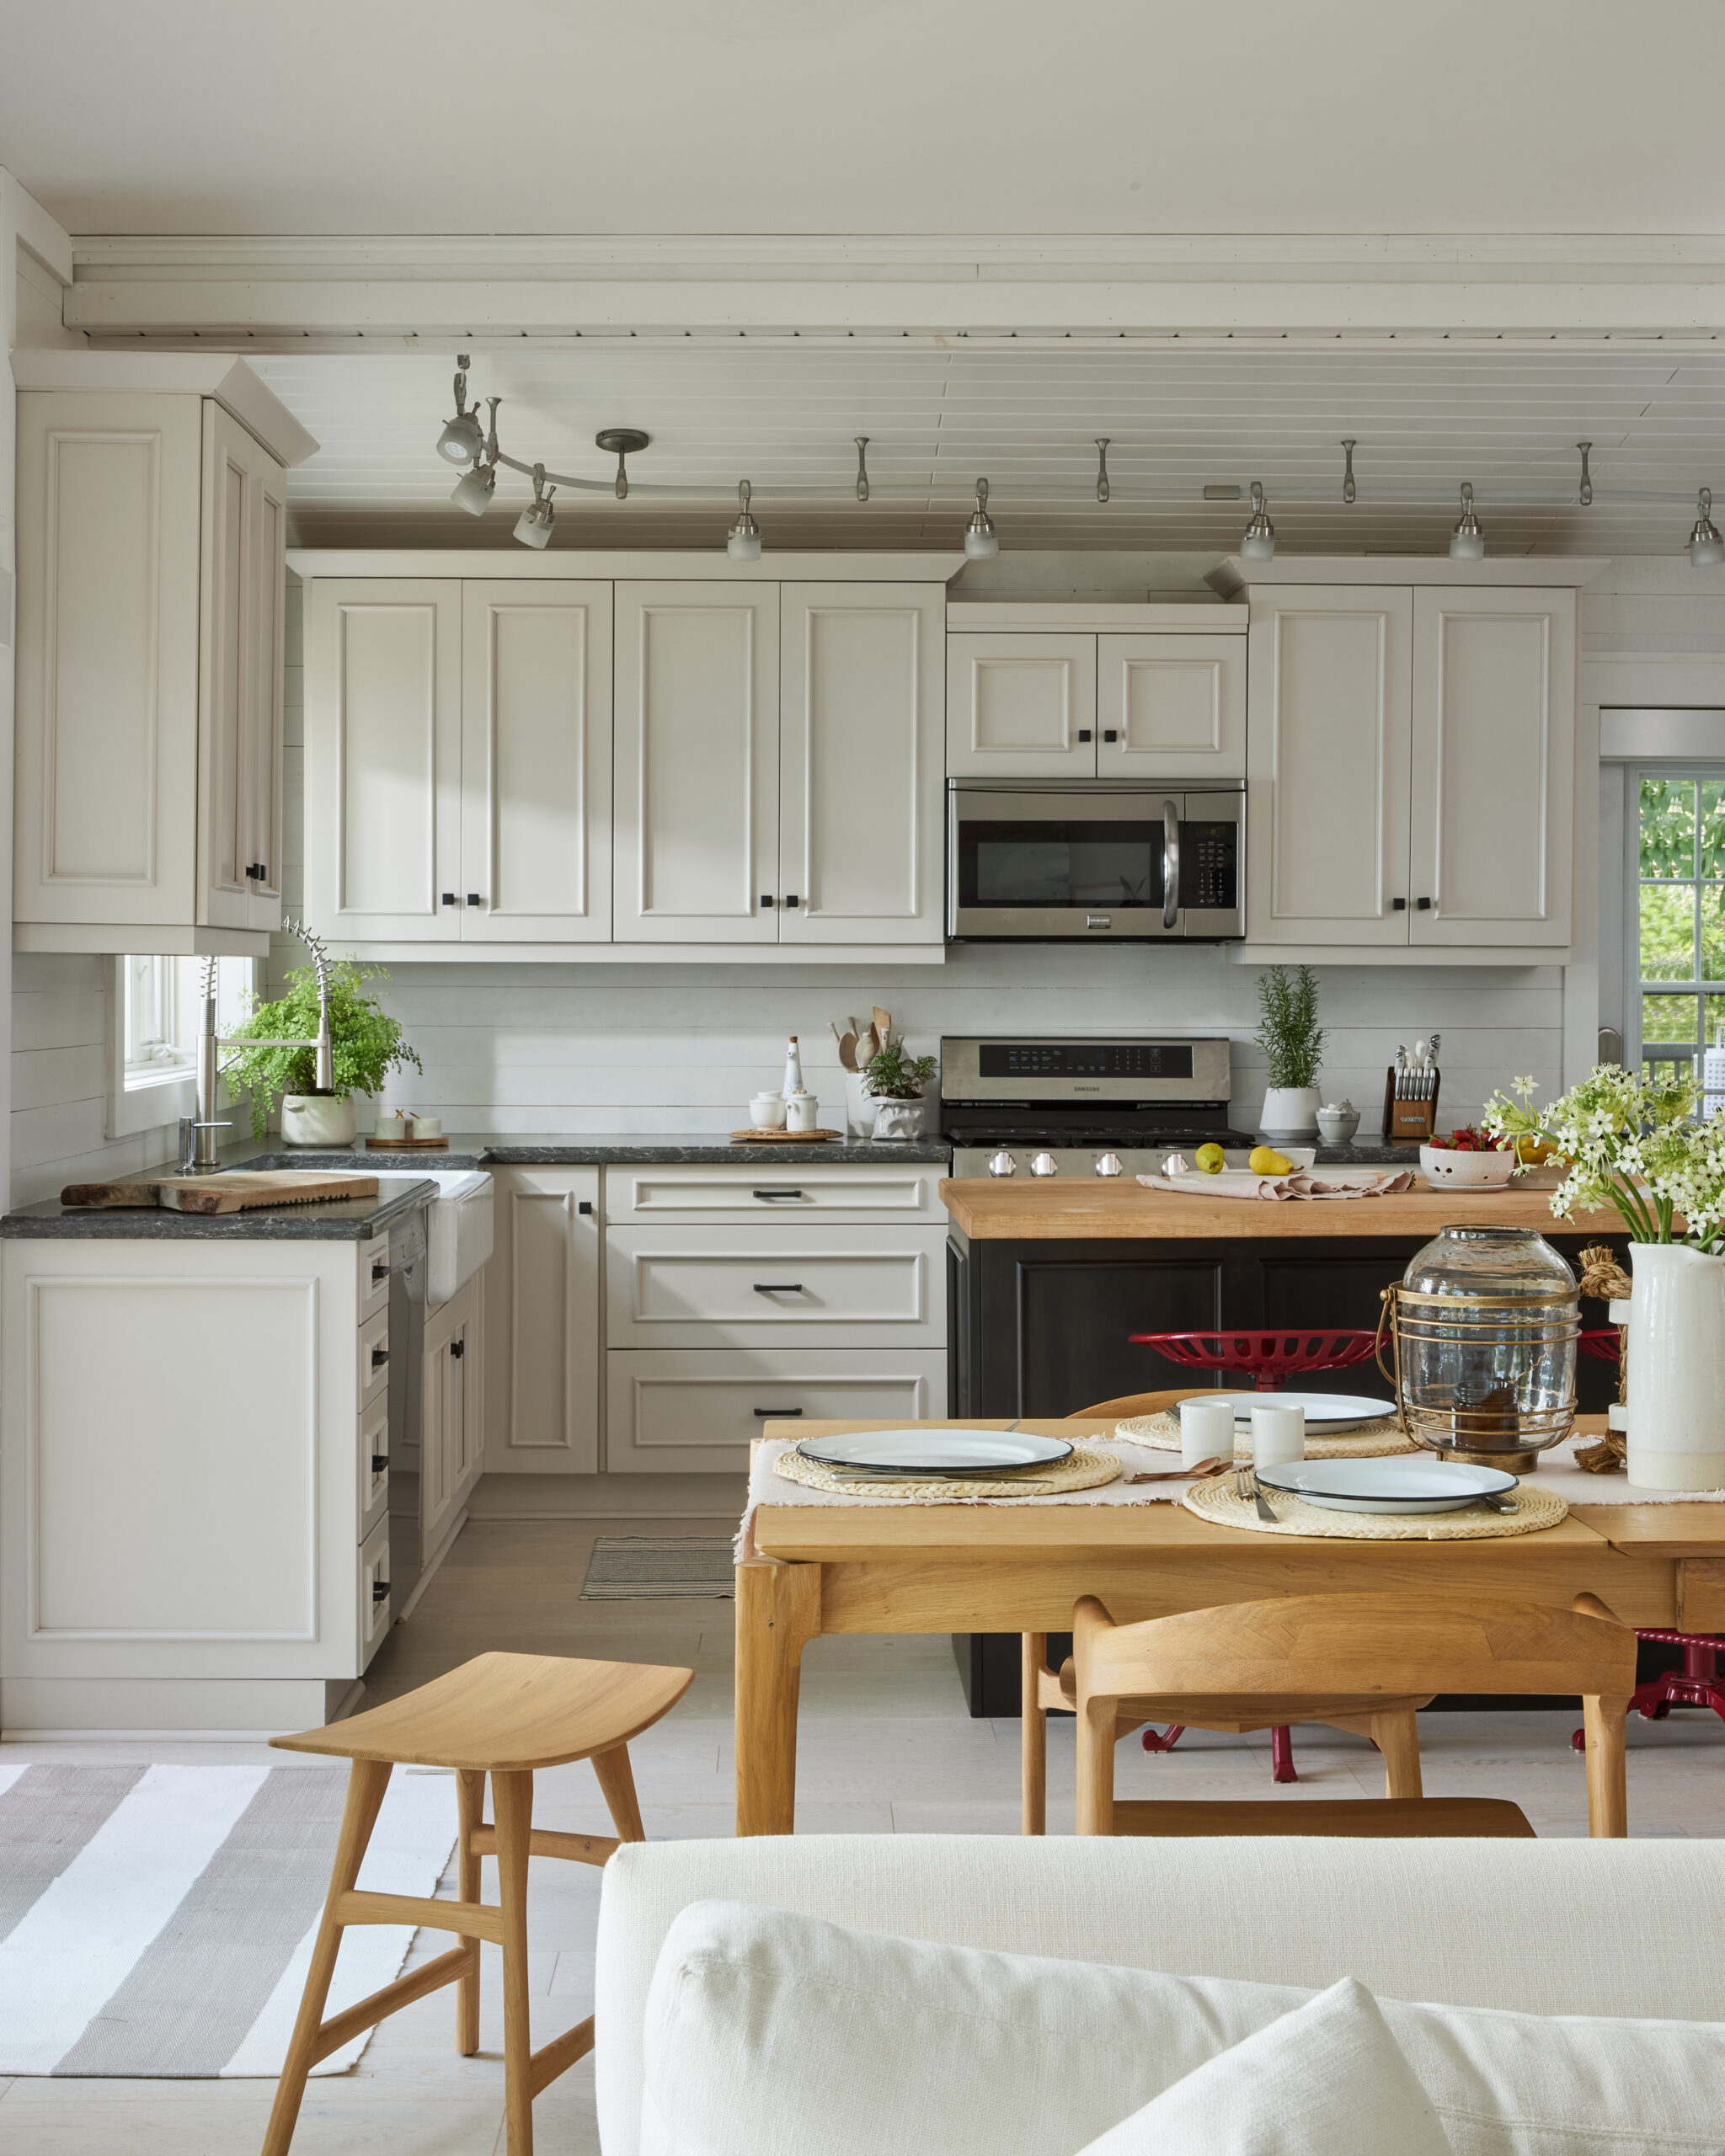 Kitchen with white cabinets, dark grey island and red stools. Staged with fresh fruit & a recipe book on the island.